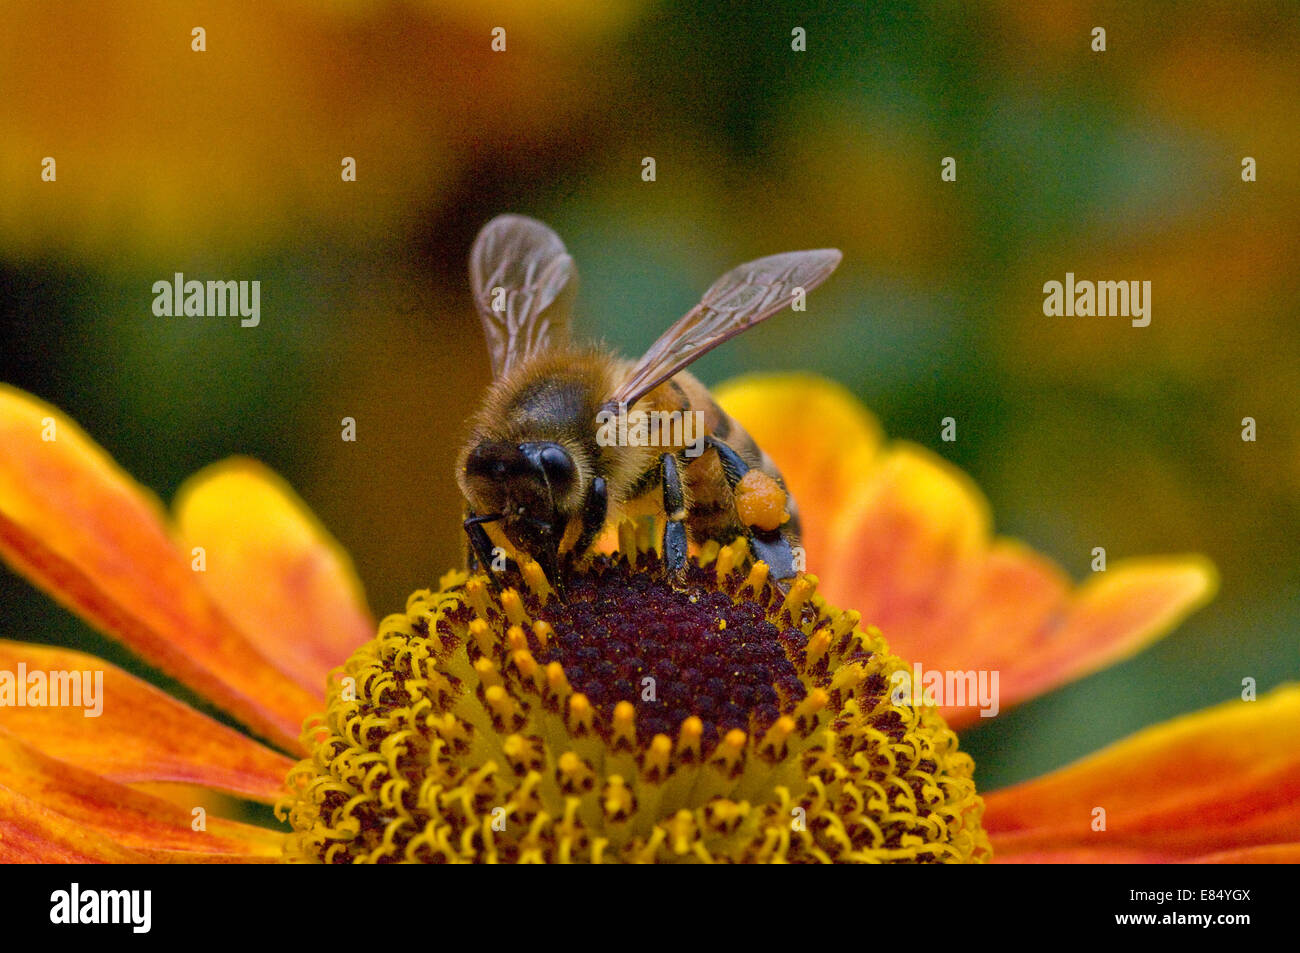 Honey bee on Helenium Waltraut flower with pollen sack clearly visible Stock Photo